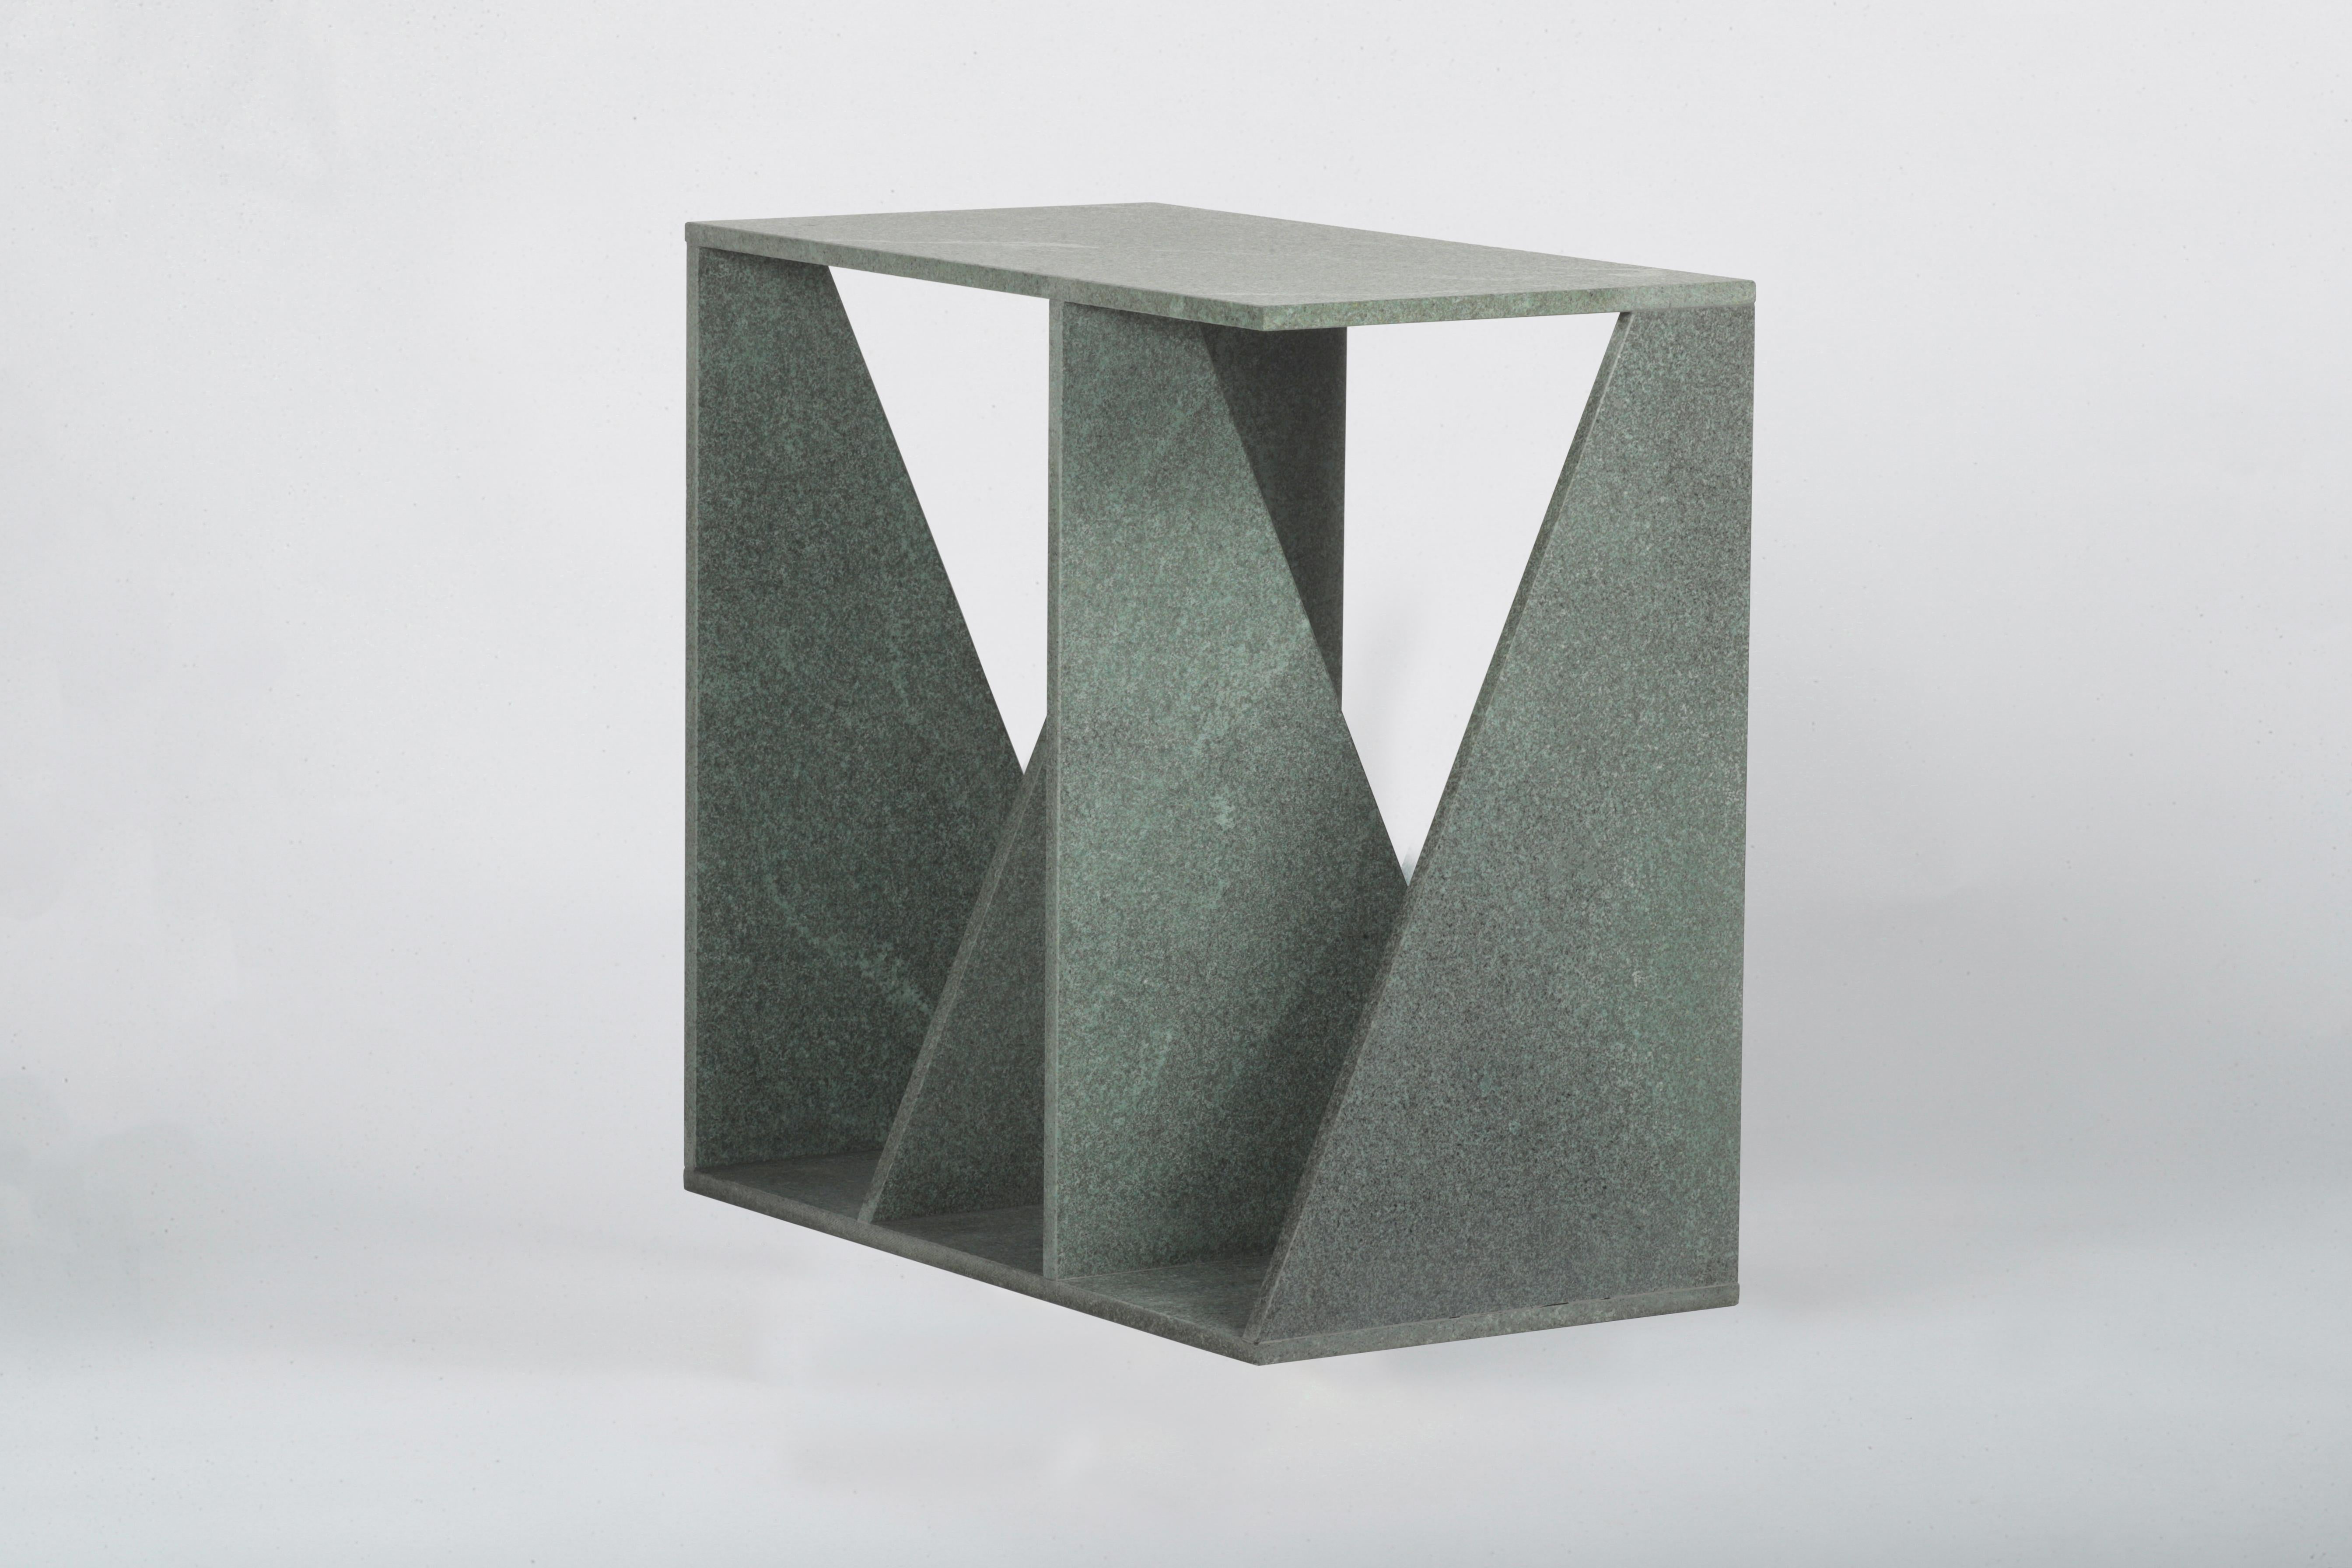 The stone layers lead to a functional purpose while creating support for a side table. The geometric sculptural form of this furniture provides small storage coming from its design. Envo is a side table that can also be used as a simple library. It